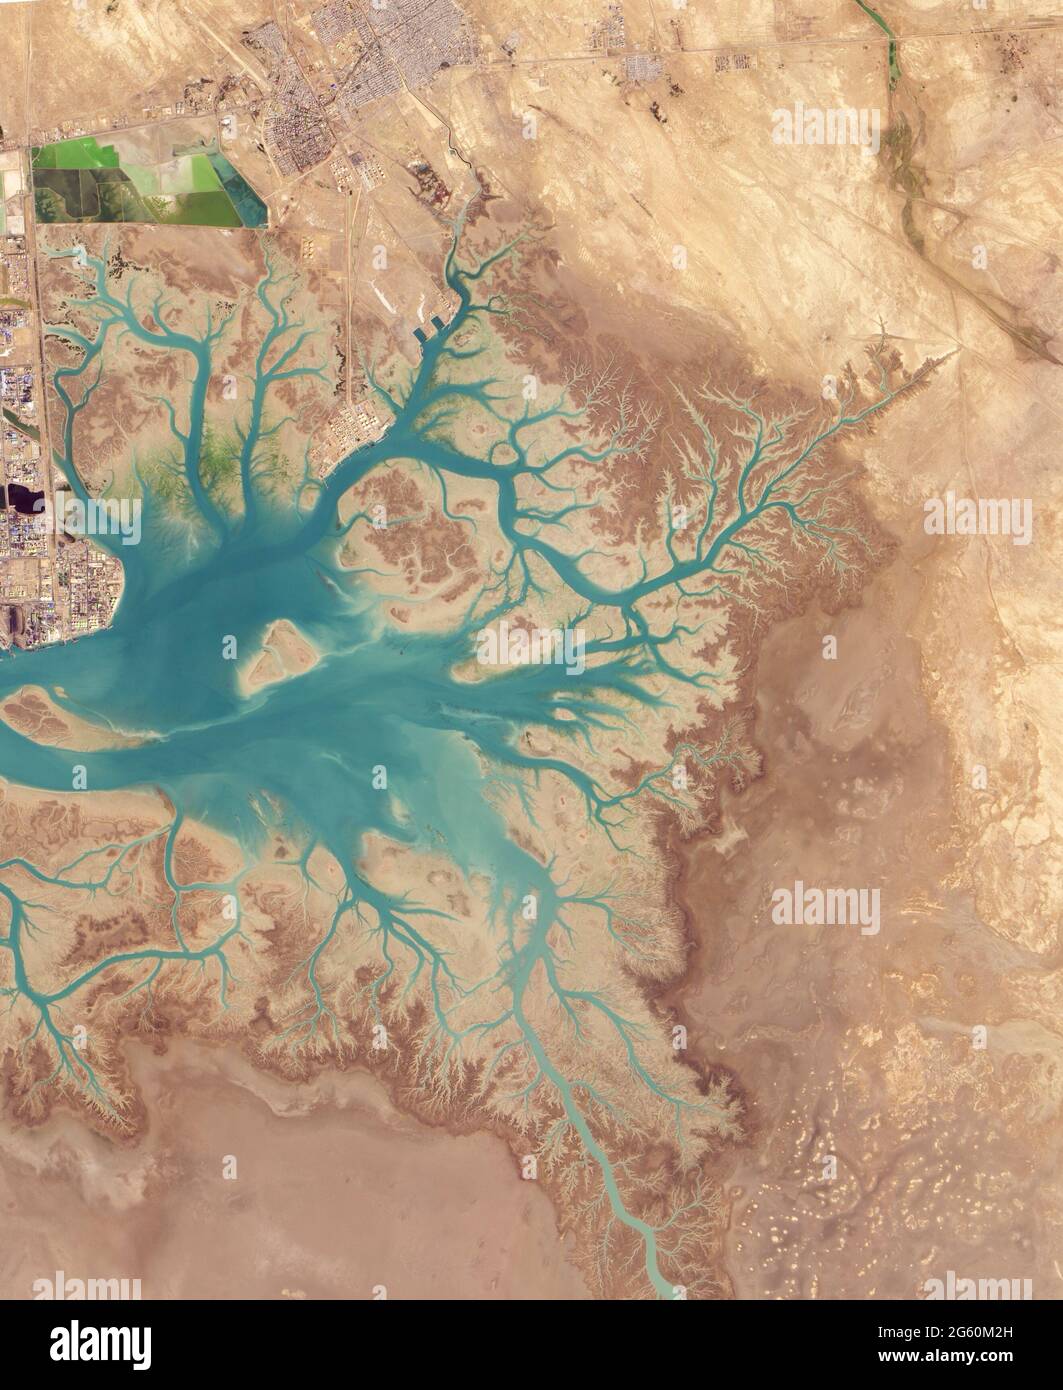 MUSA BAY, IRAN - 20 January 2015 - Before draining into the Persian Gulf, several rivers and streams in southern Iran converge into Musa Bay, a shallo Stock Photo